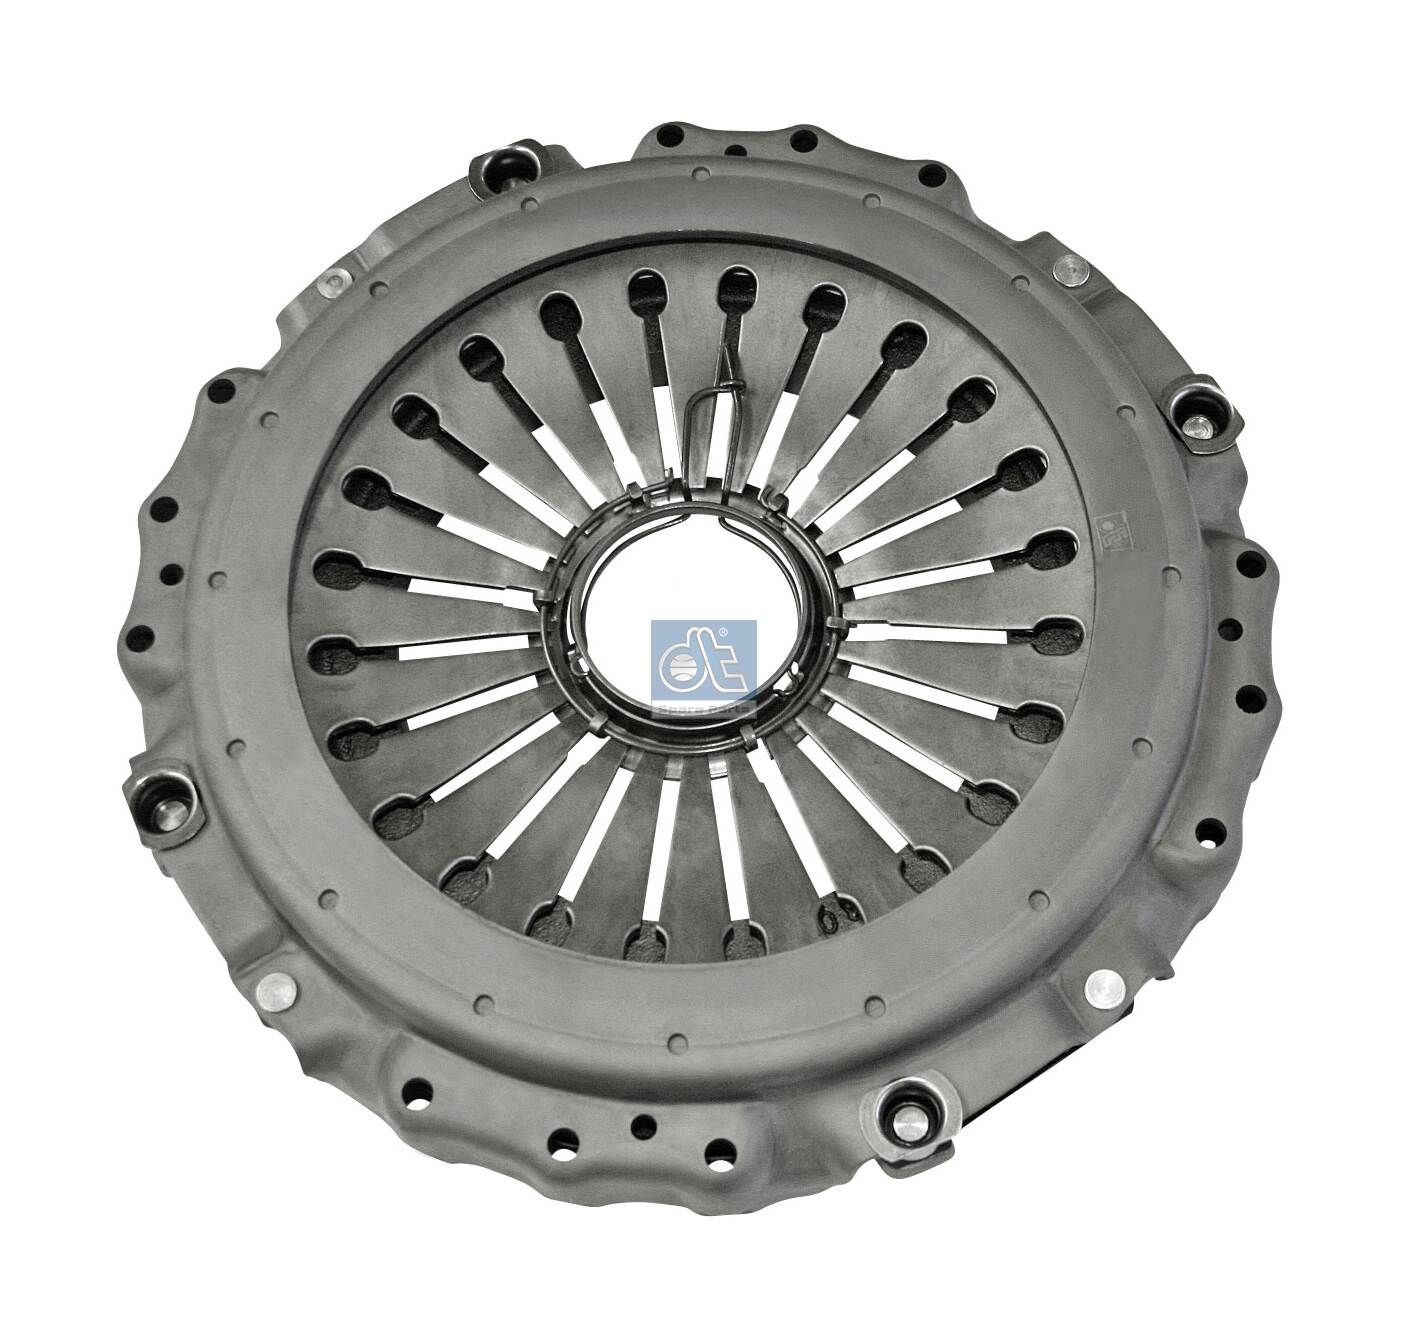 3482 000 246 DT Spare Parts 3.40009 Clutch Pressure Plate 81 30305 0239